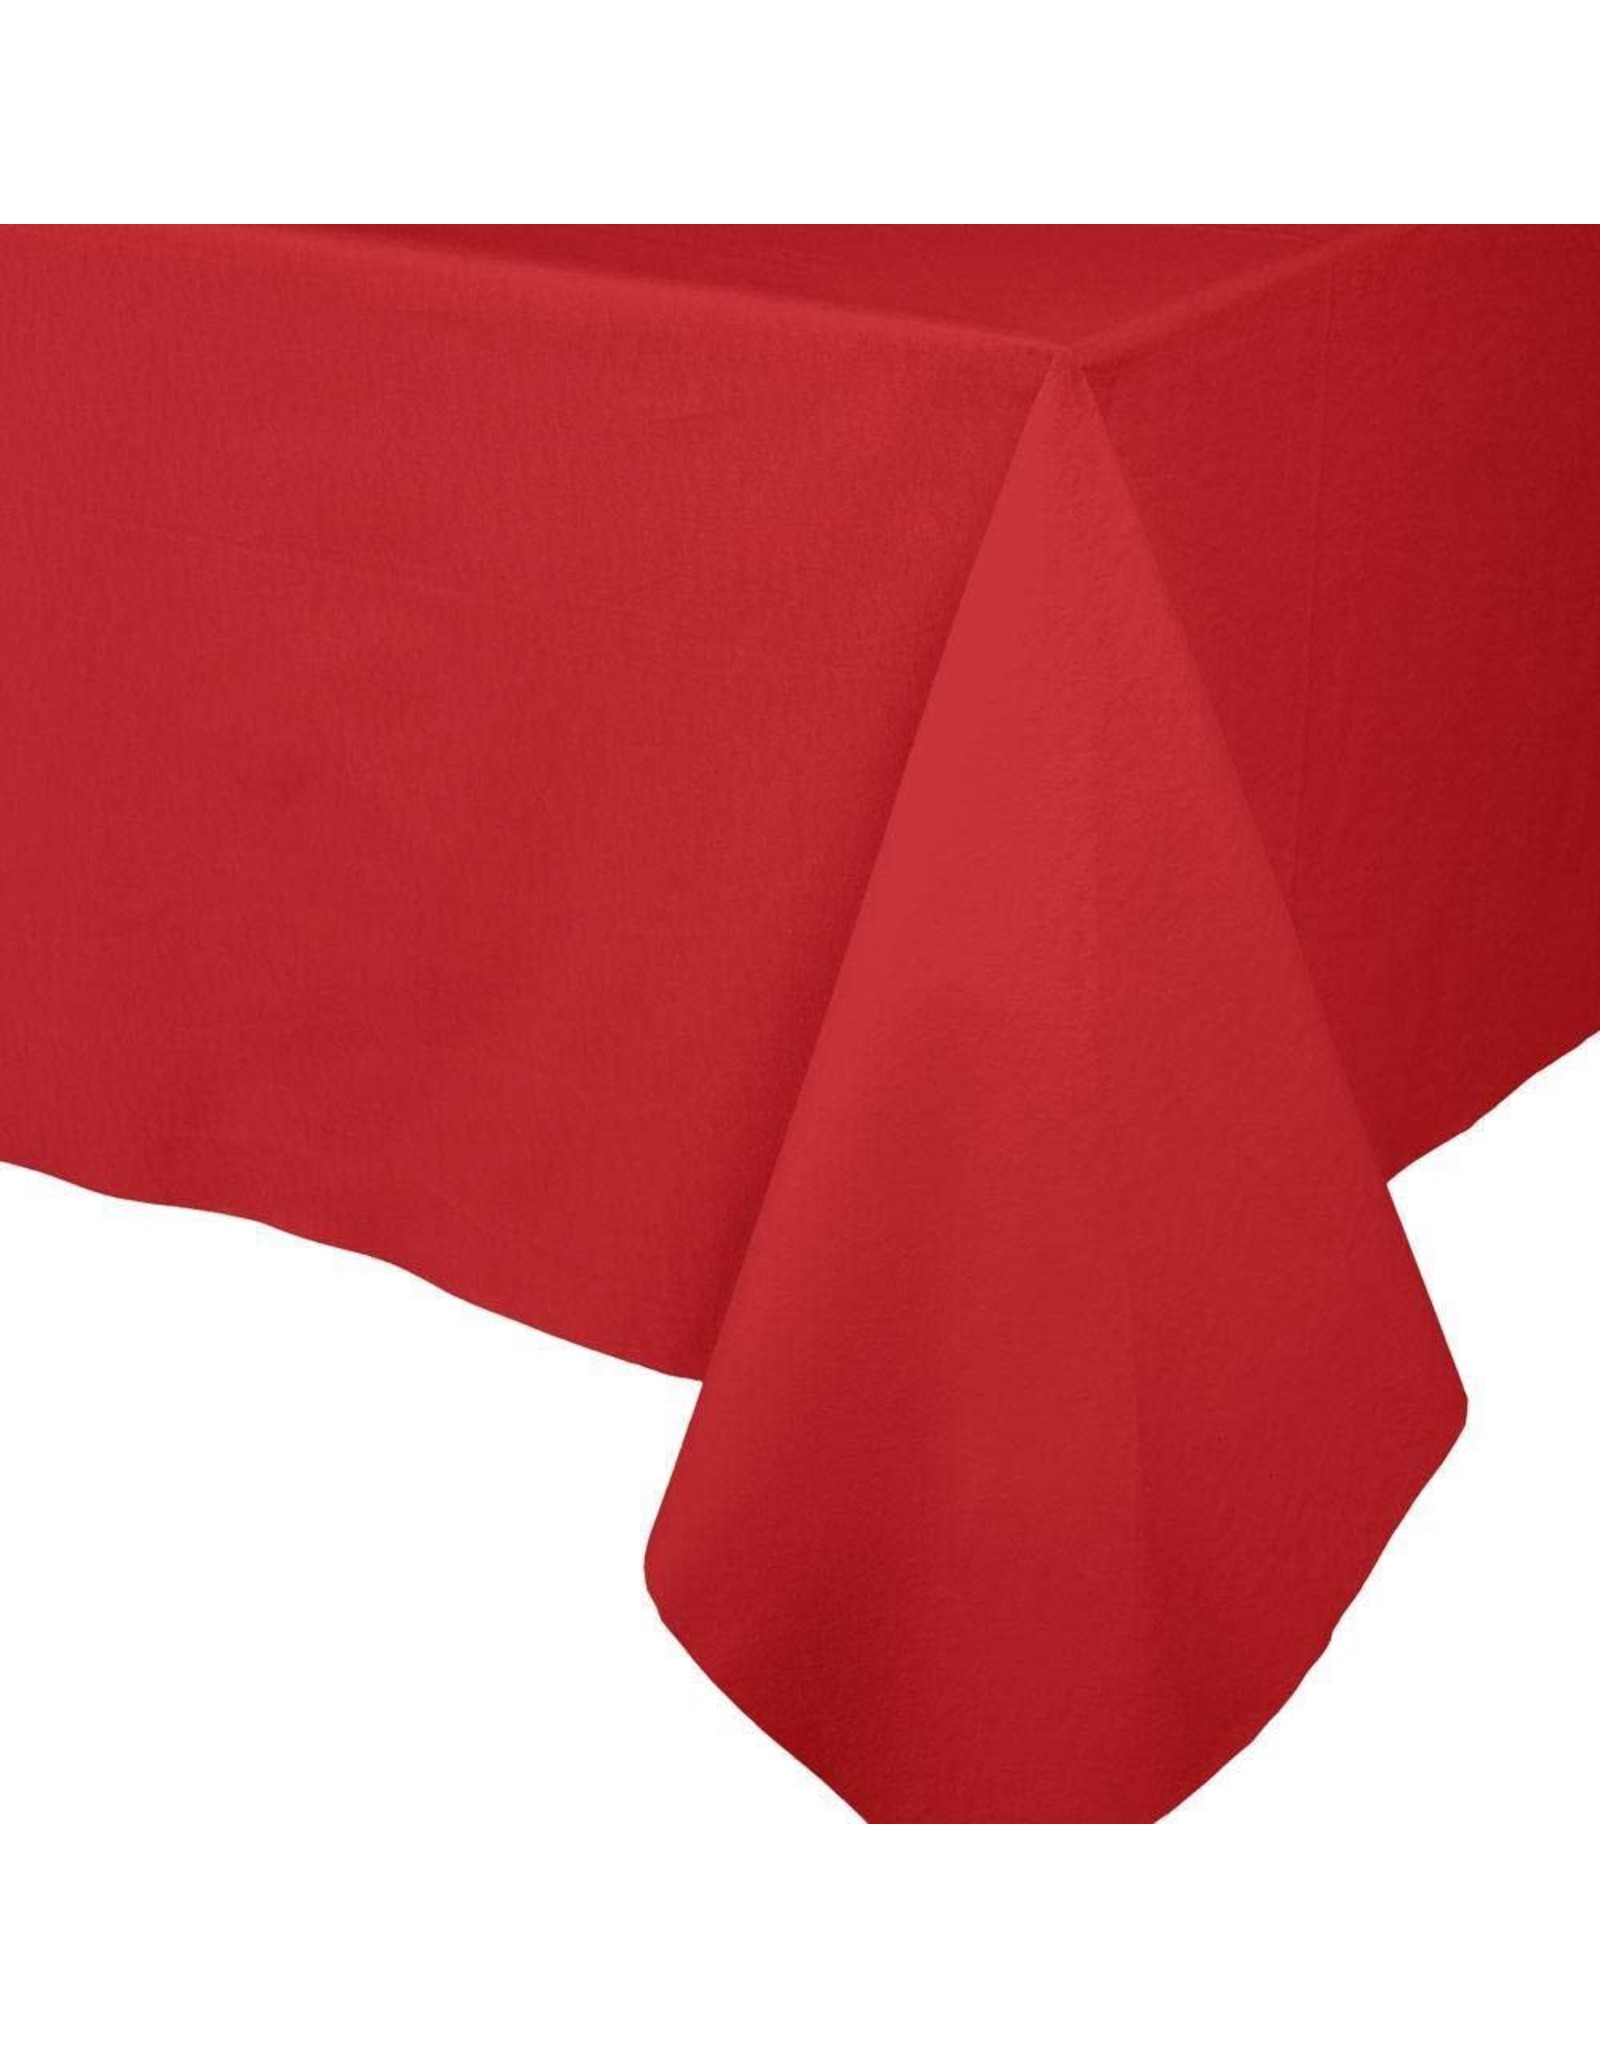 Caspari Paper Linen Solid Table Covers In Red